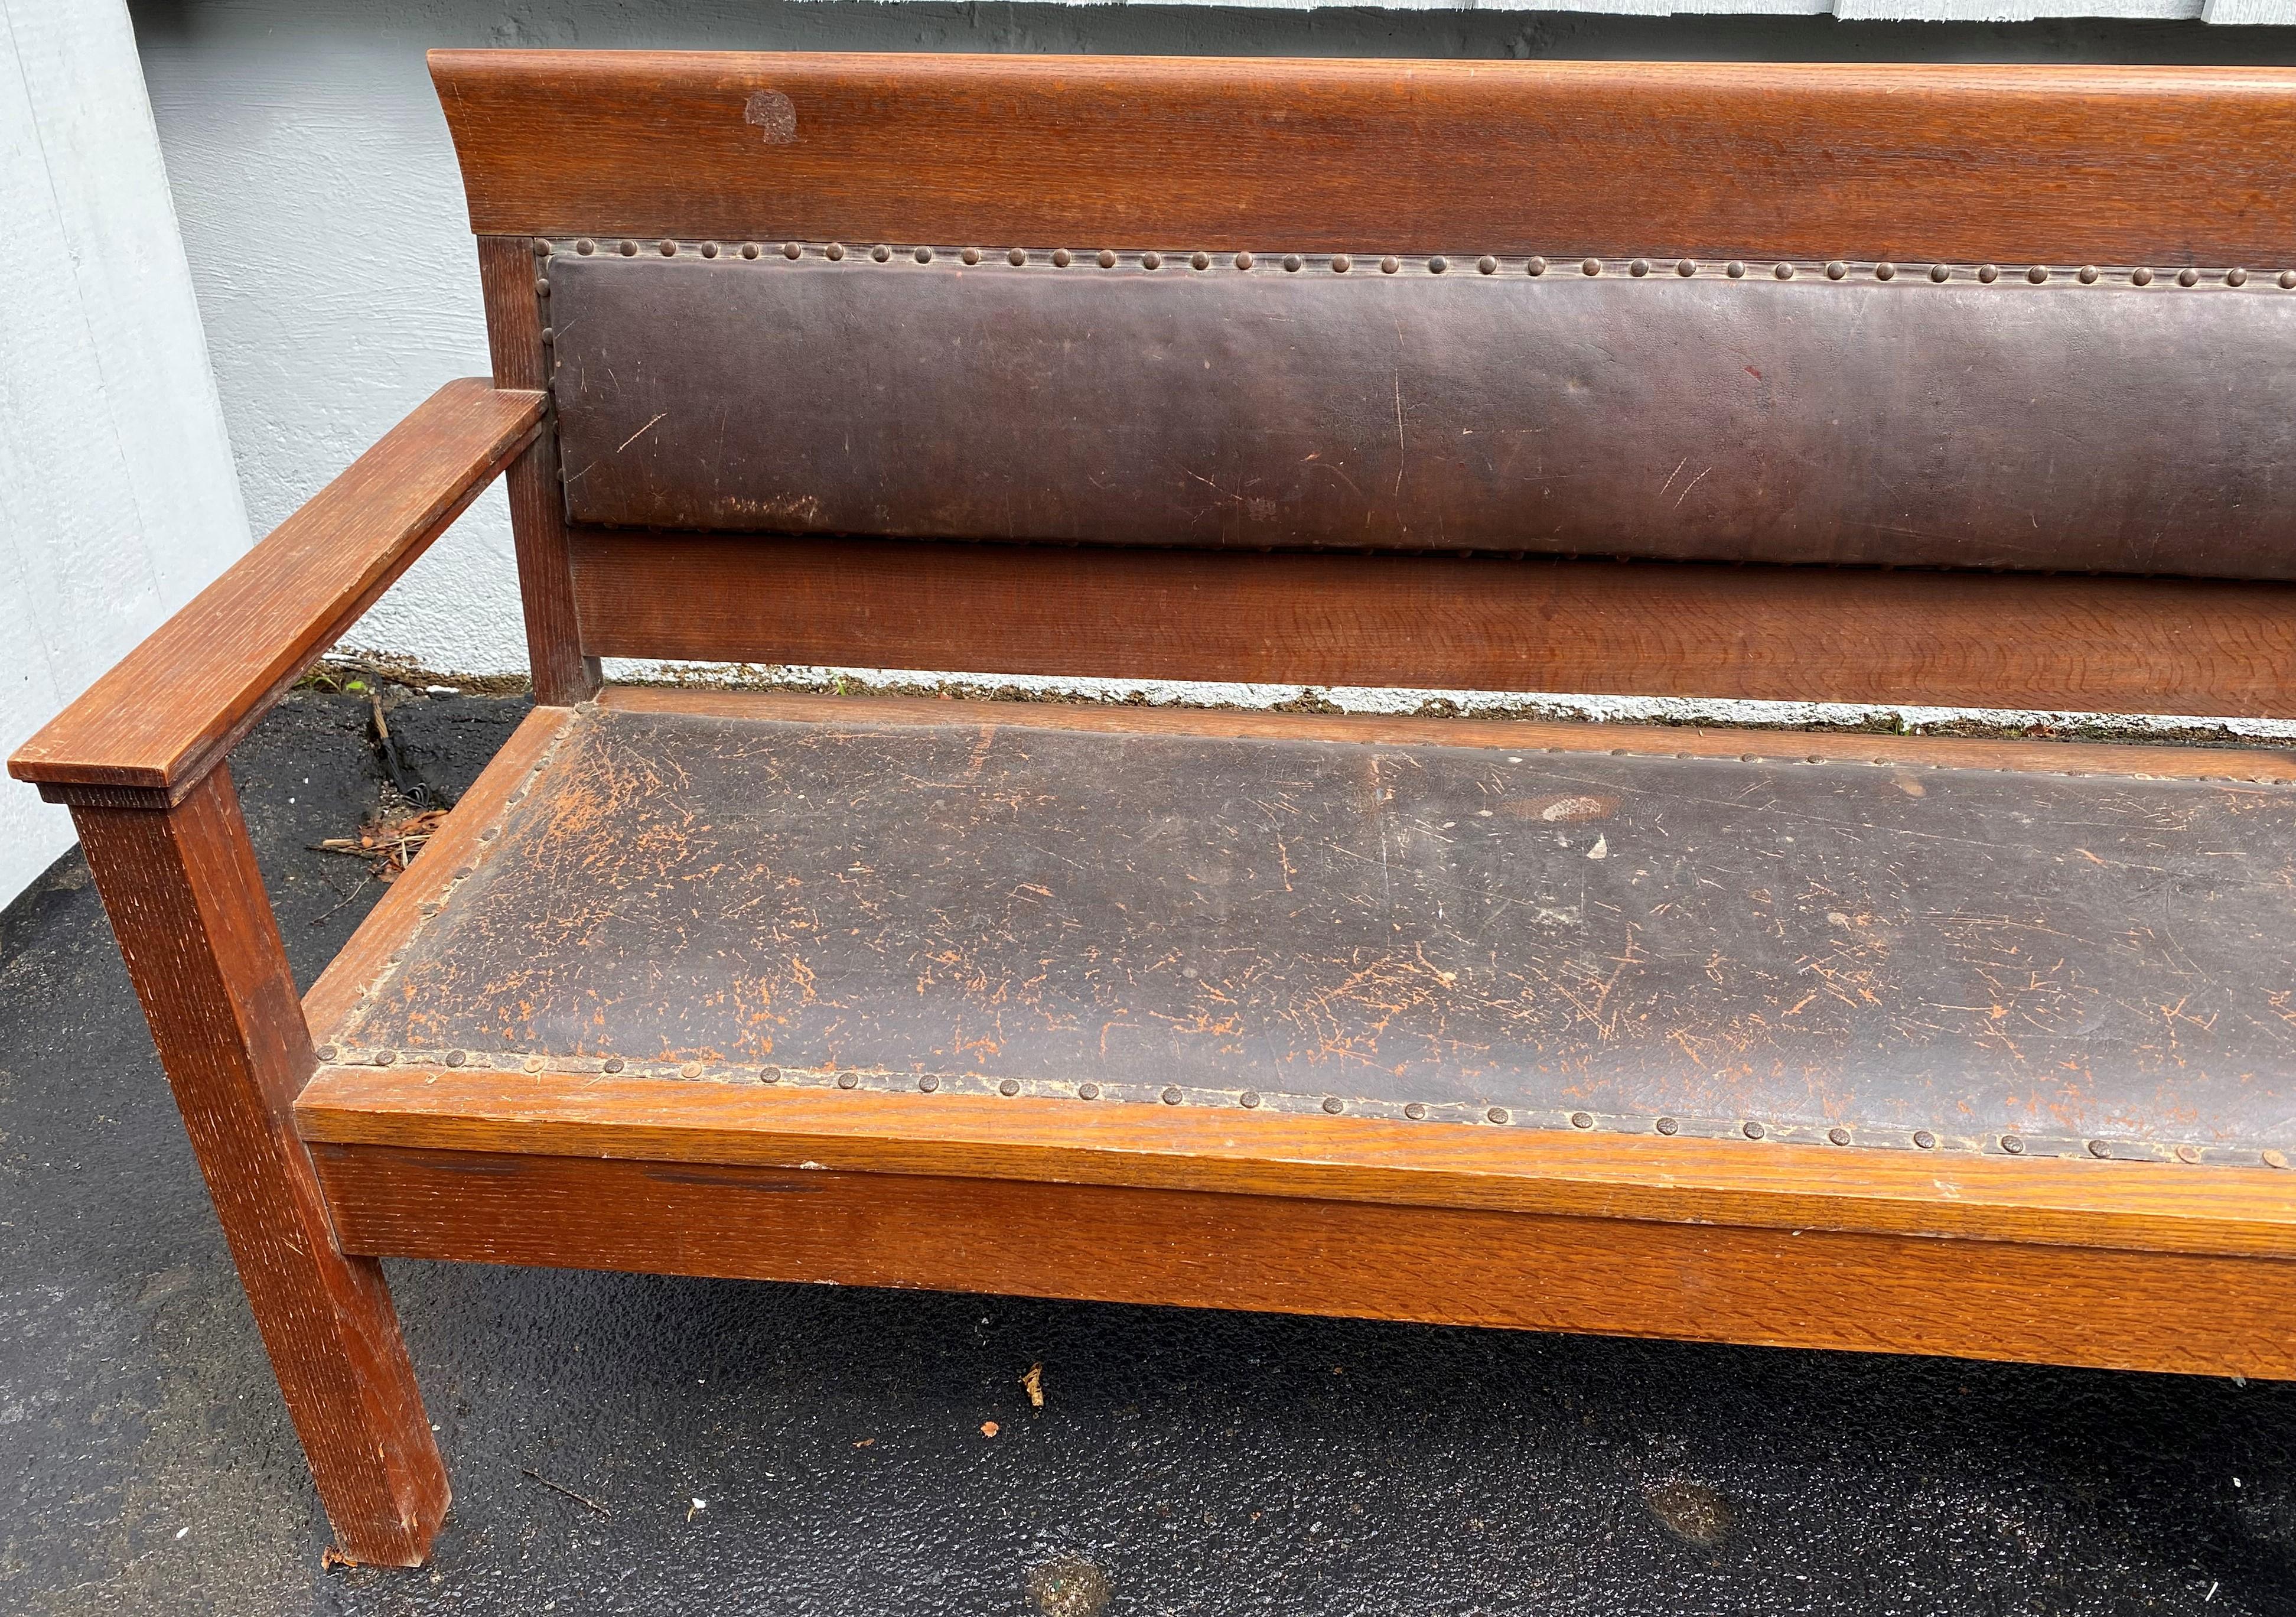 A nice example of a large oak railroad or train station bench with original nailed brown leather upholstered pads and seats, and original finish, supported by six legs. The bench dates to the late 19th or early 20th century in very good overall